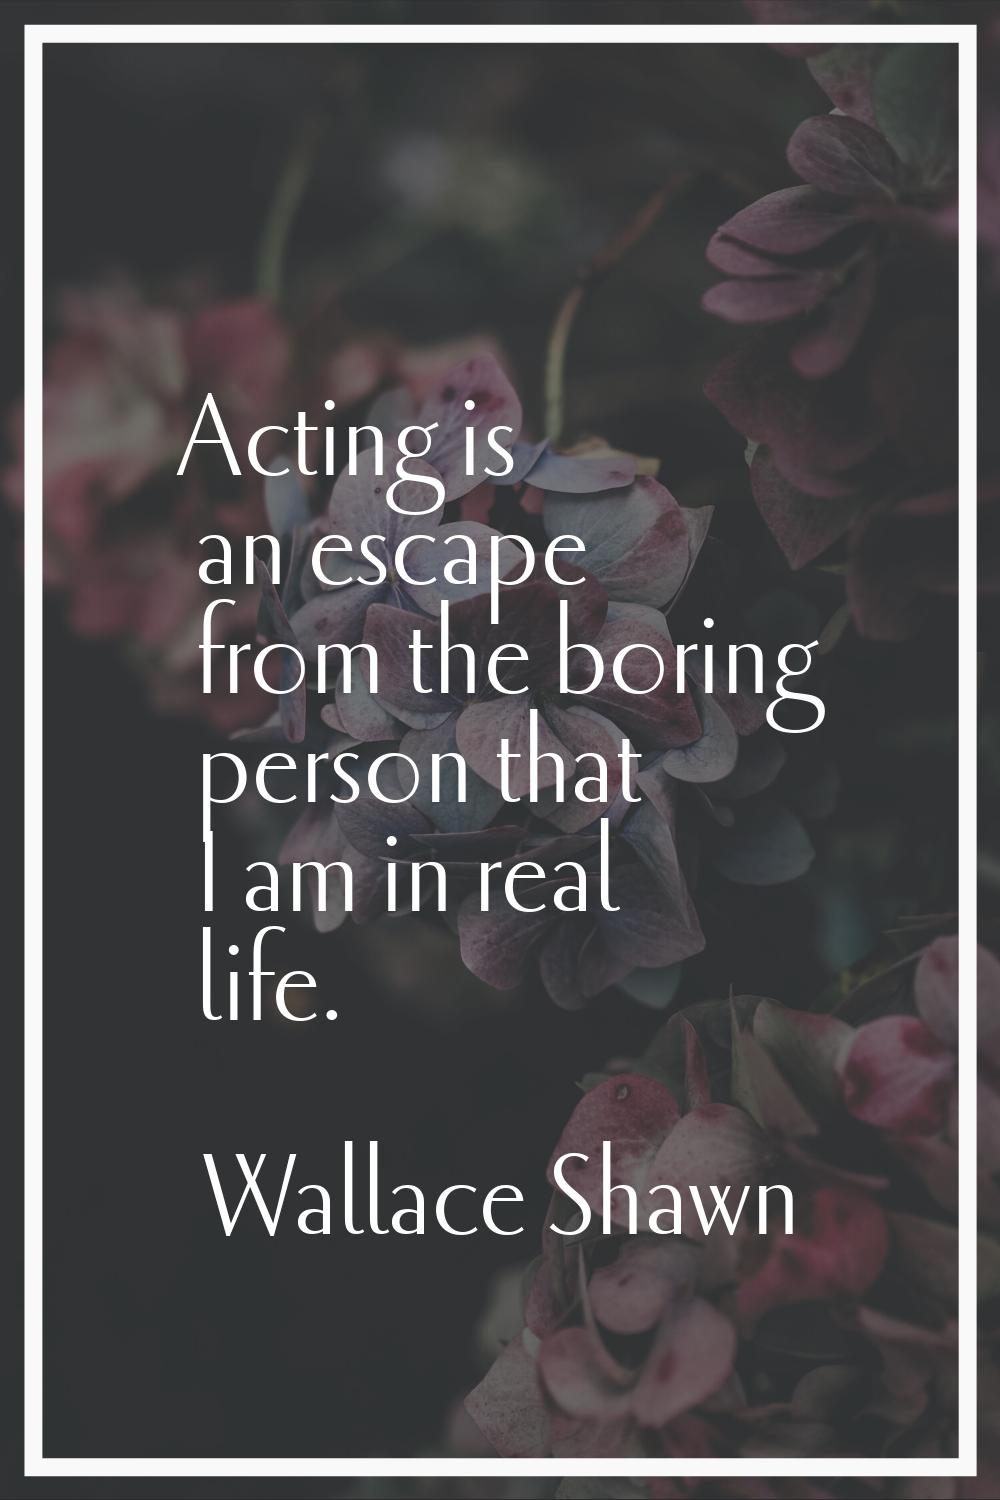 Acting is an escape from the boring person that I am in real life.